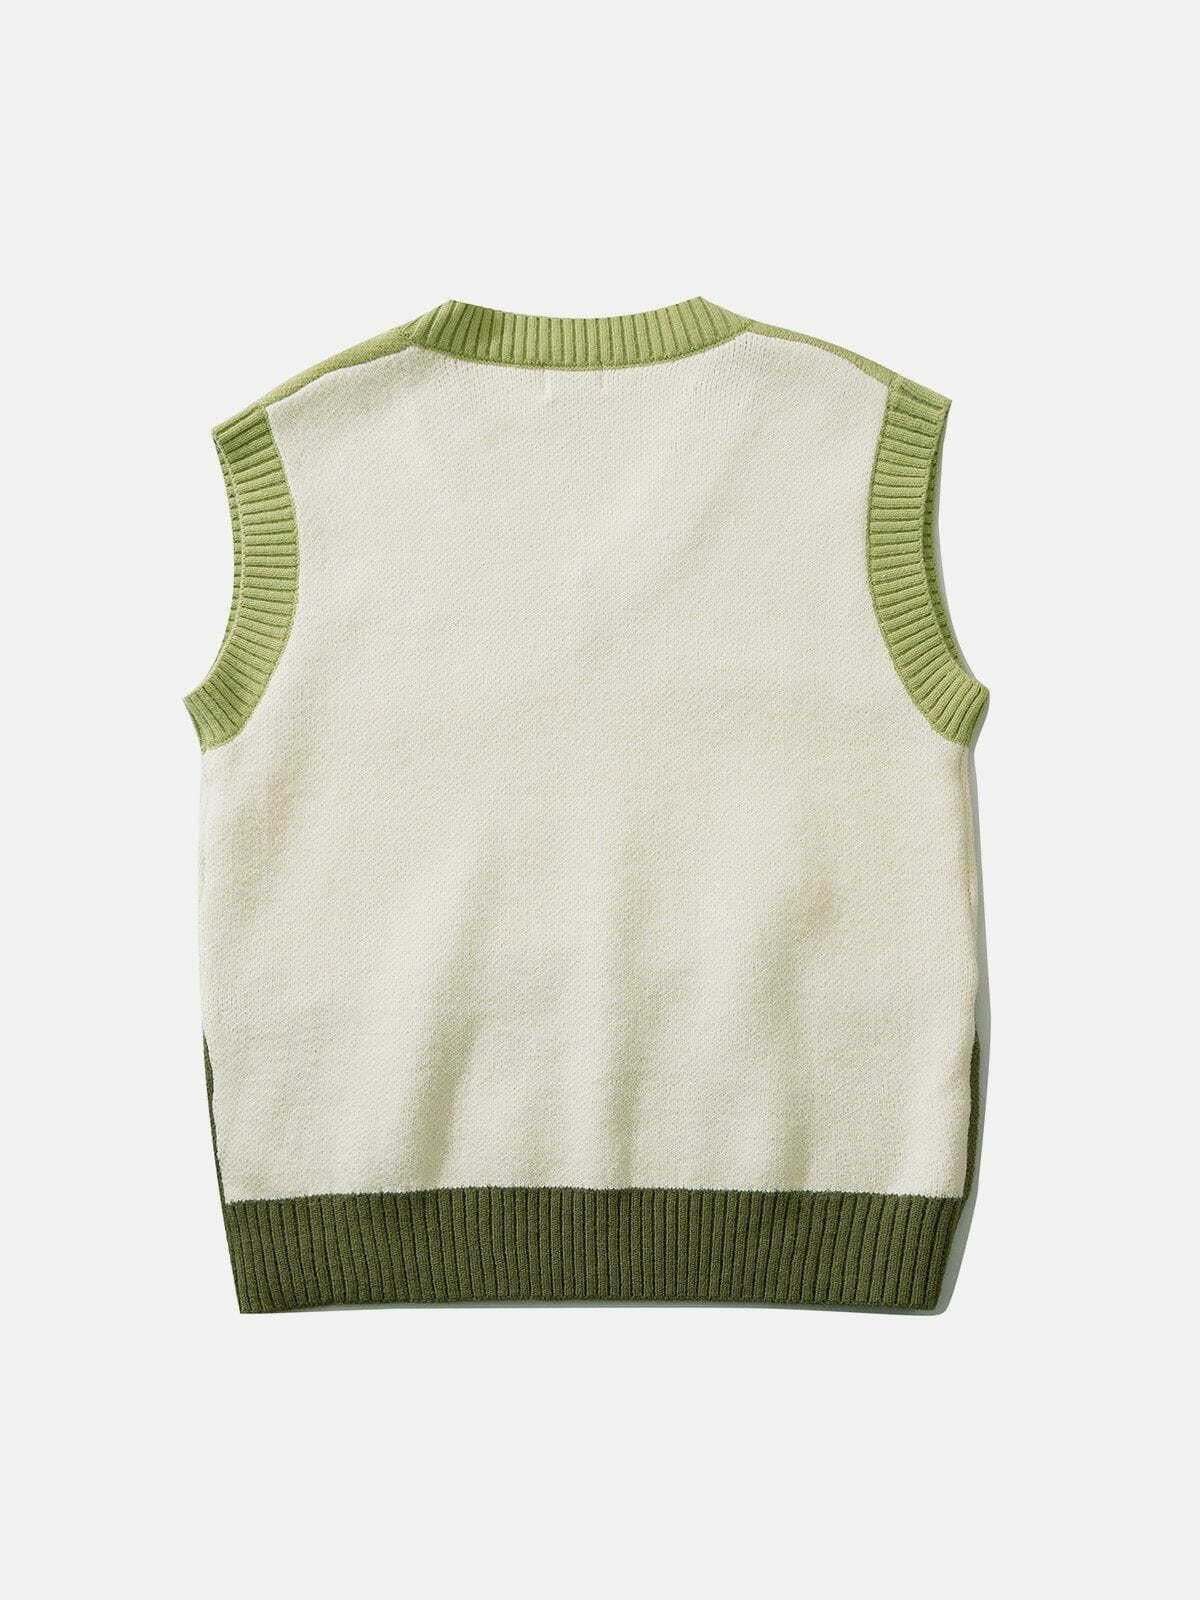 tricolor stitching sweater vest edgy y2k streetwear essential 6347